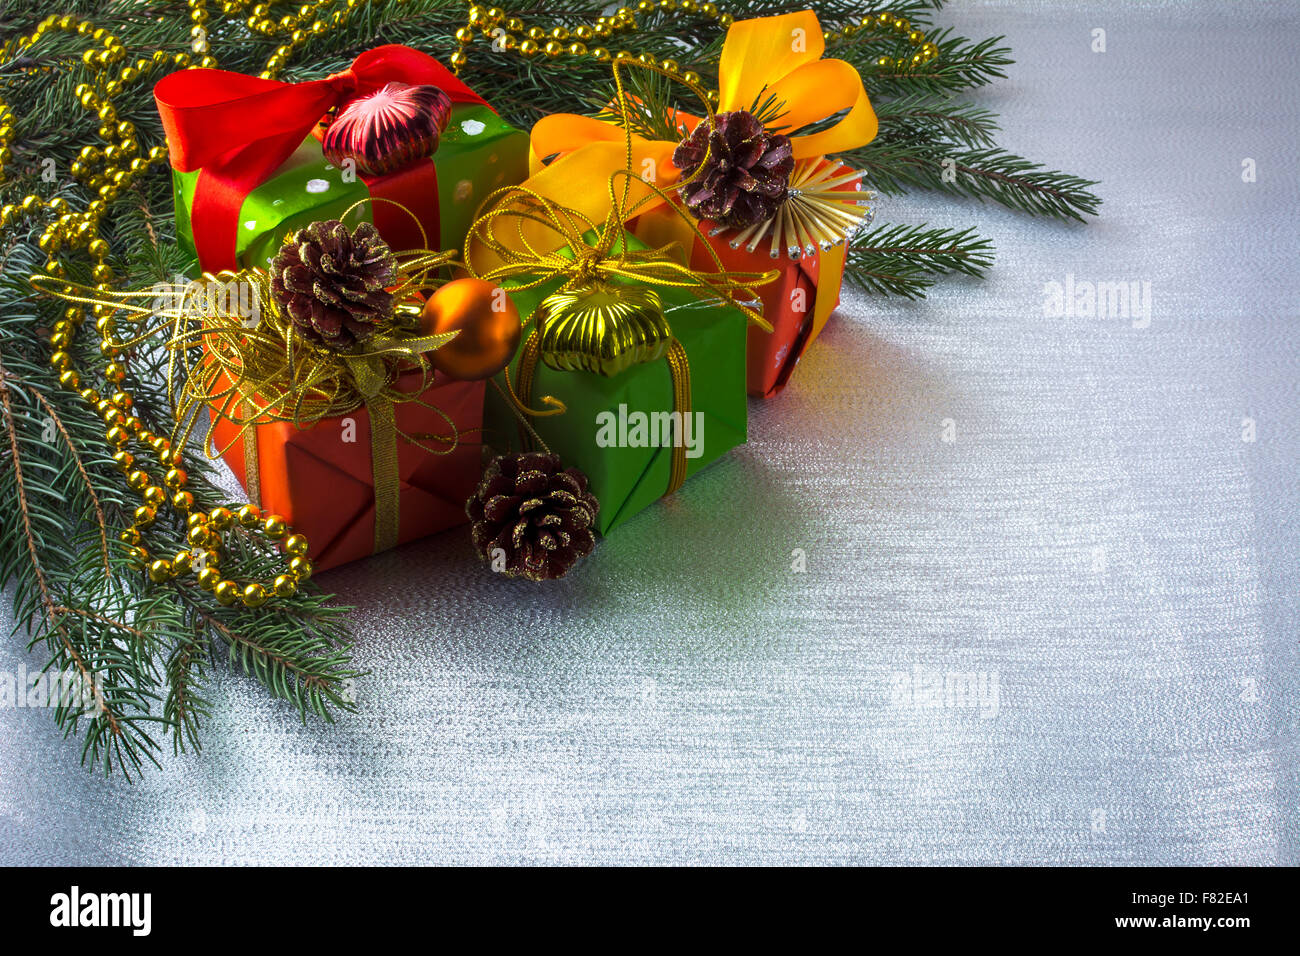 Christmas decoration with fir branches, gift boxes, ribbon, balls, ornament on silver sparkles background, selective focus Stock Photo